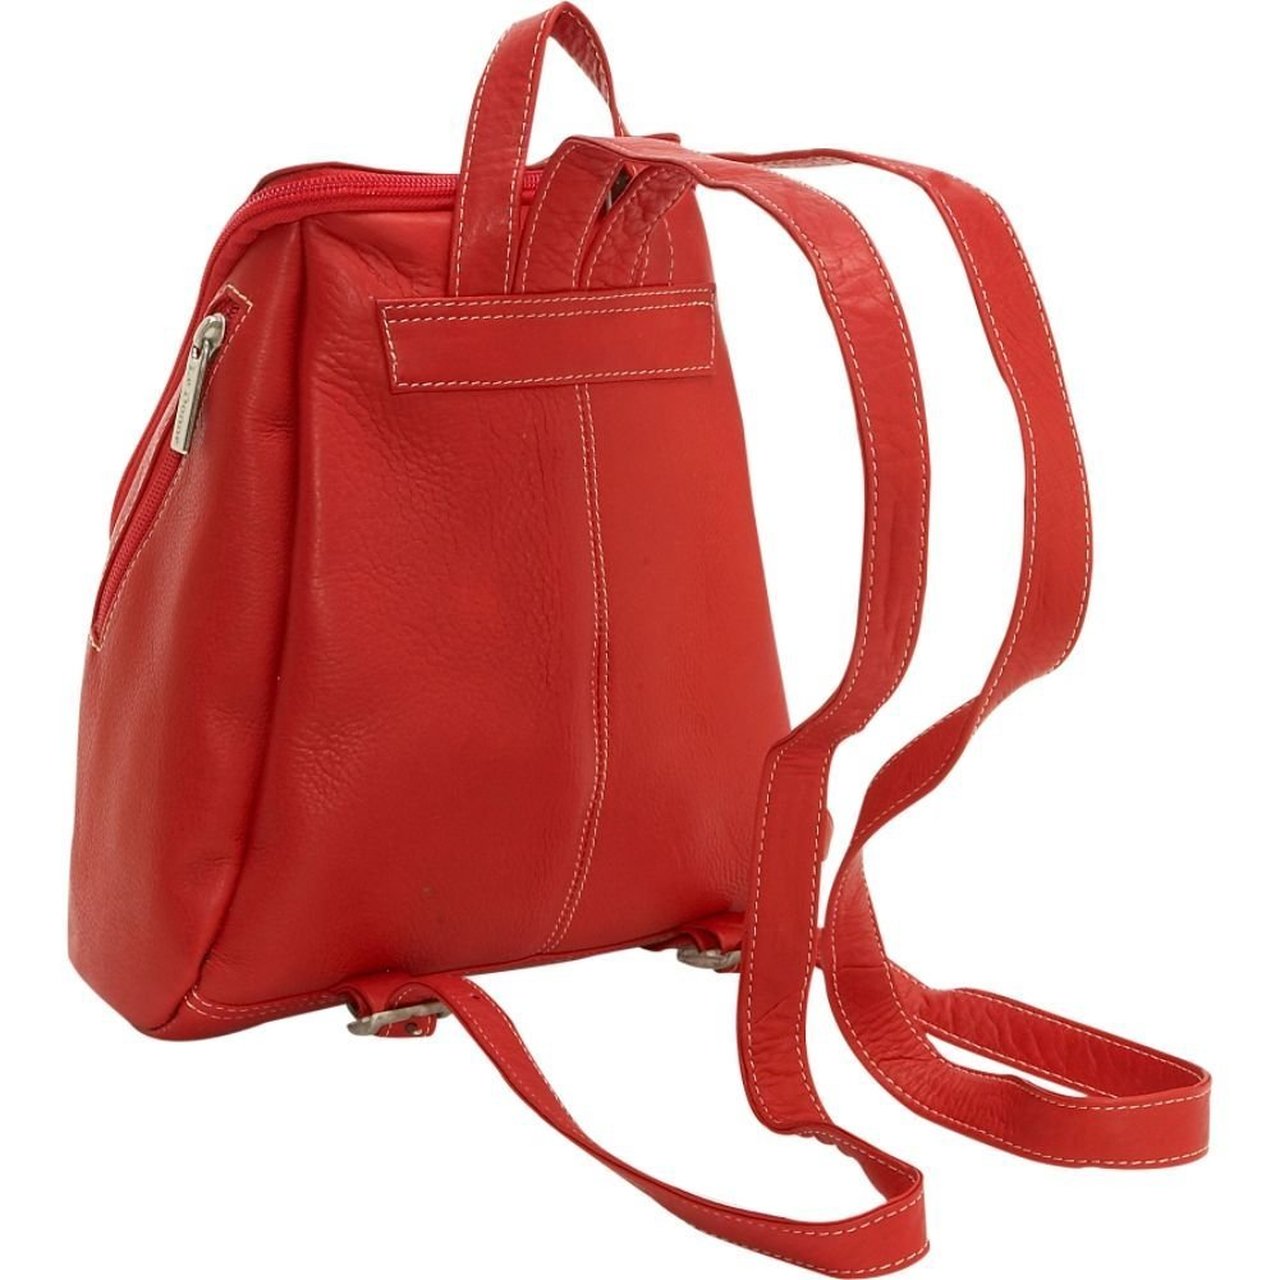 Le Donne Leather U-Zip Mini Backpack LD-030 - image 3 of 5